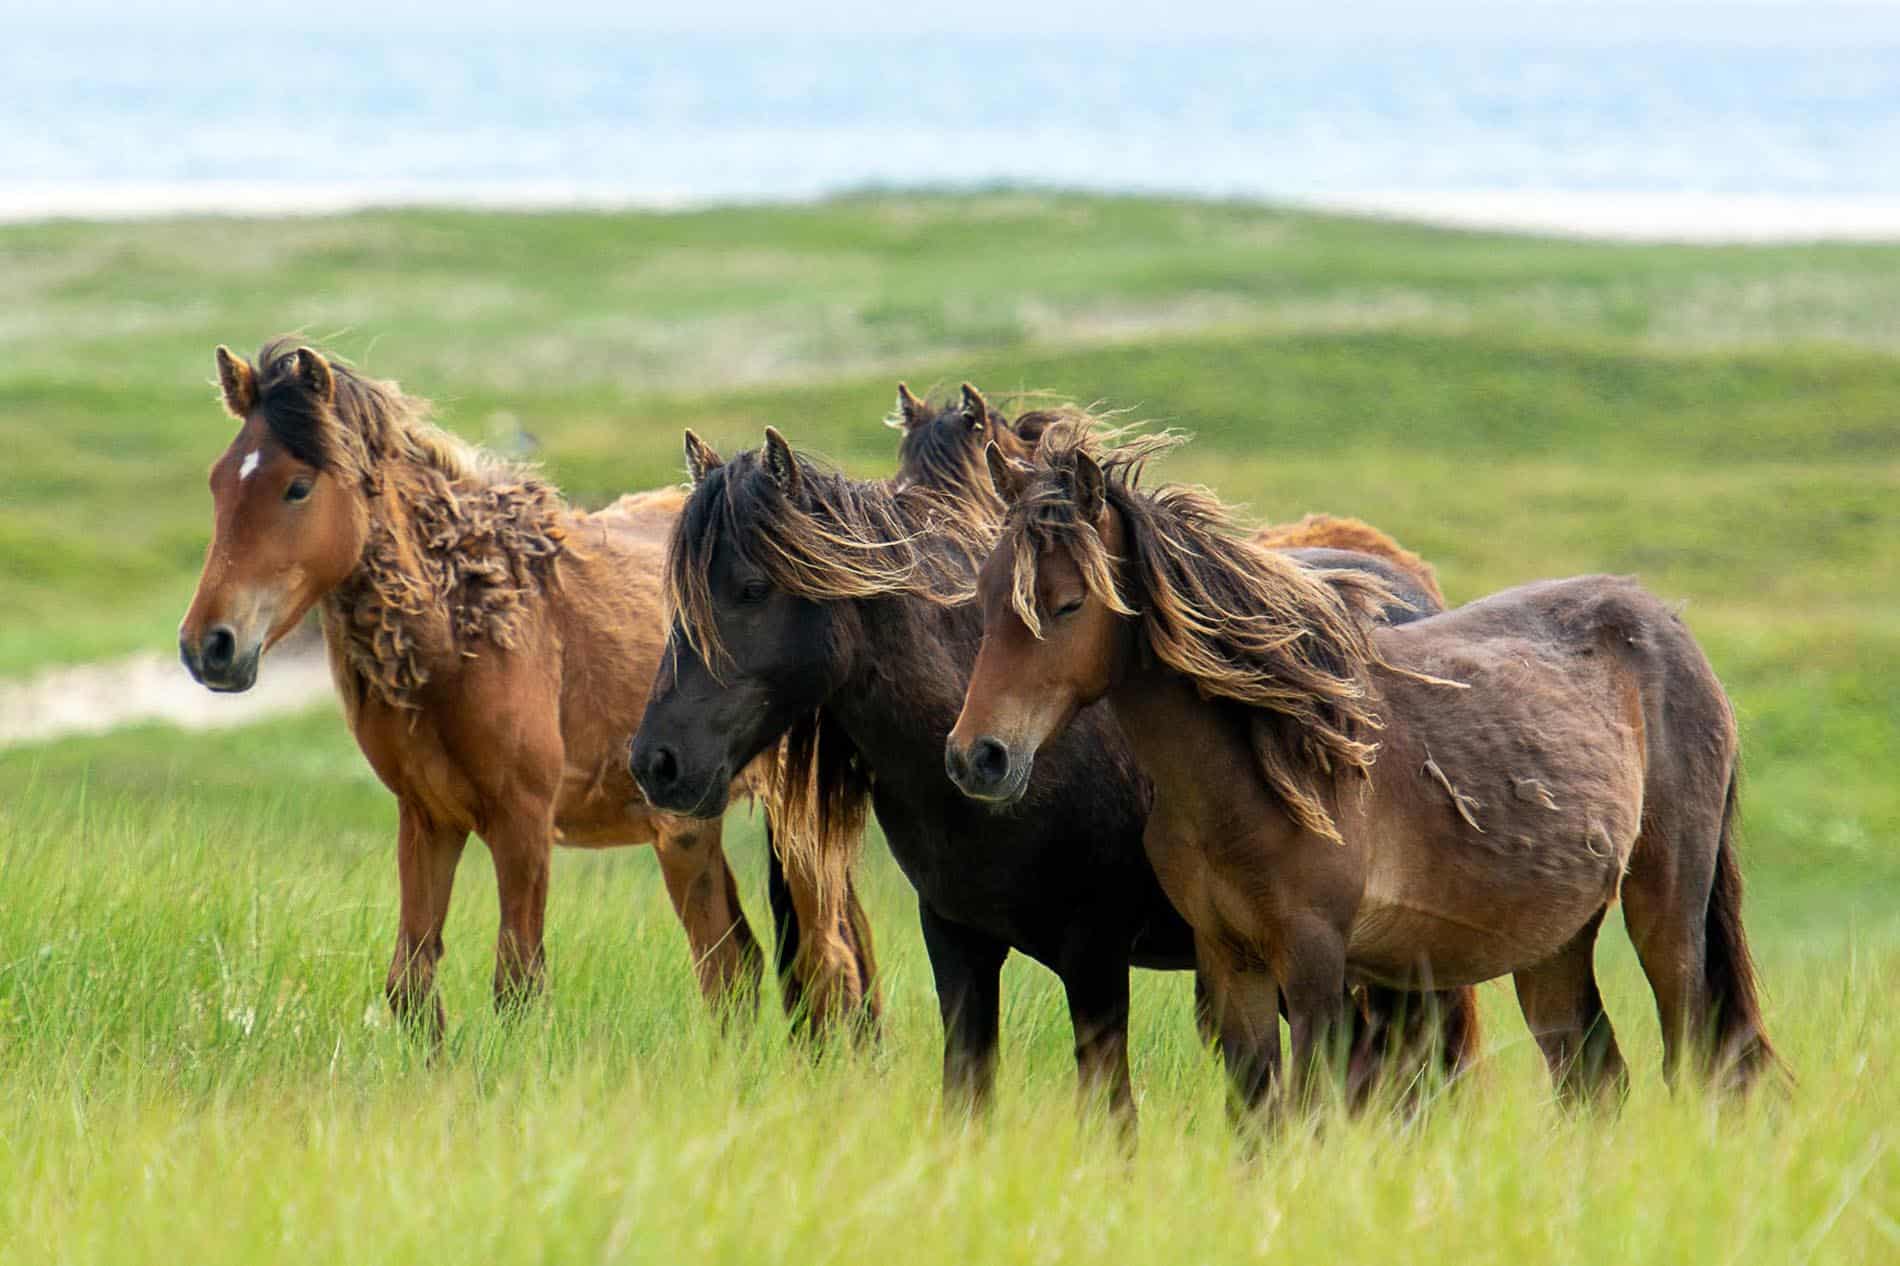 A band of wild horses stand together in the marram grass dunes above the ocean on Sable Island, Nova Scotia - image by Picture Perfect Tours and Geordie Mott.